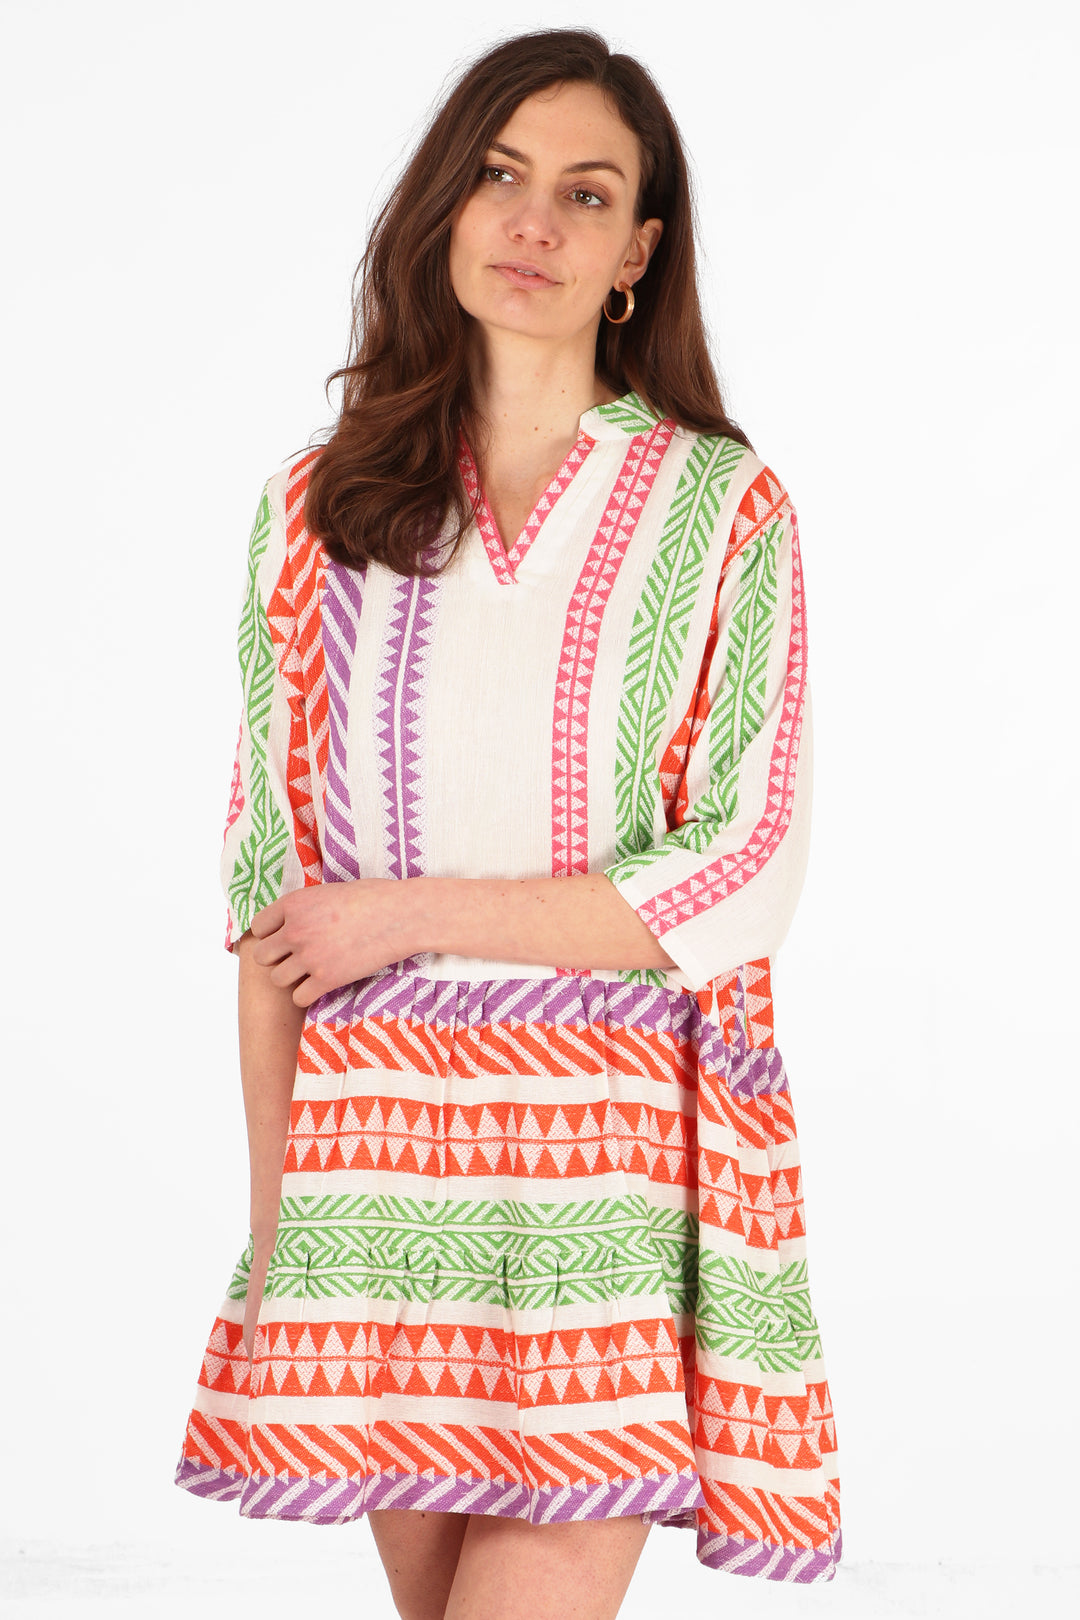 model wearing a multicoloured, orange, pink, purple, green and creammidi dress with an aztec print pattern and 3/4 sleeves